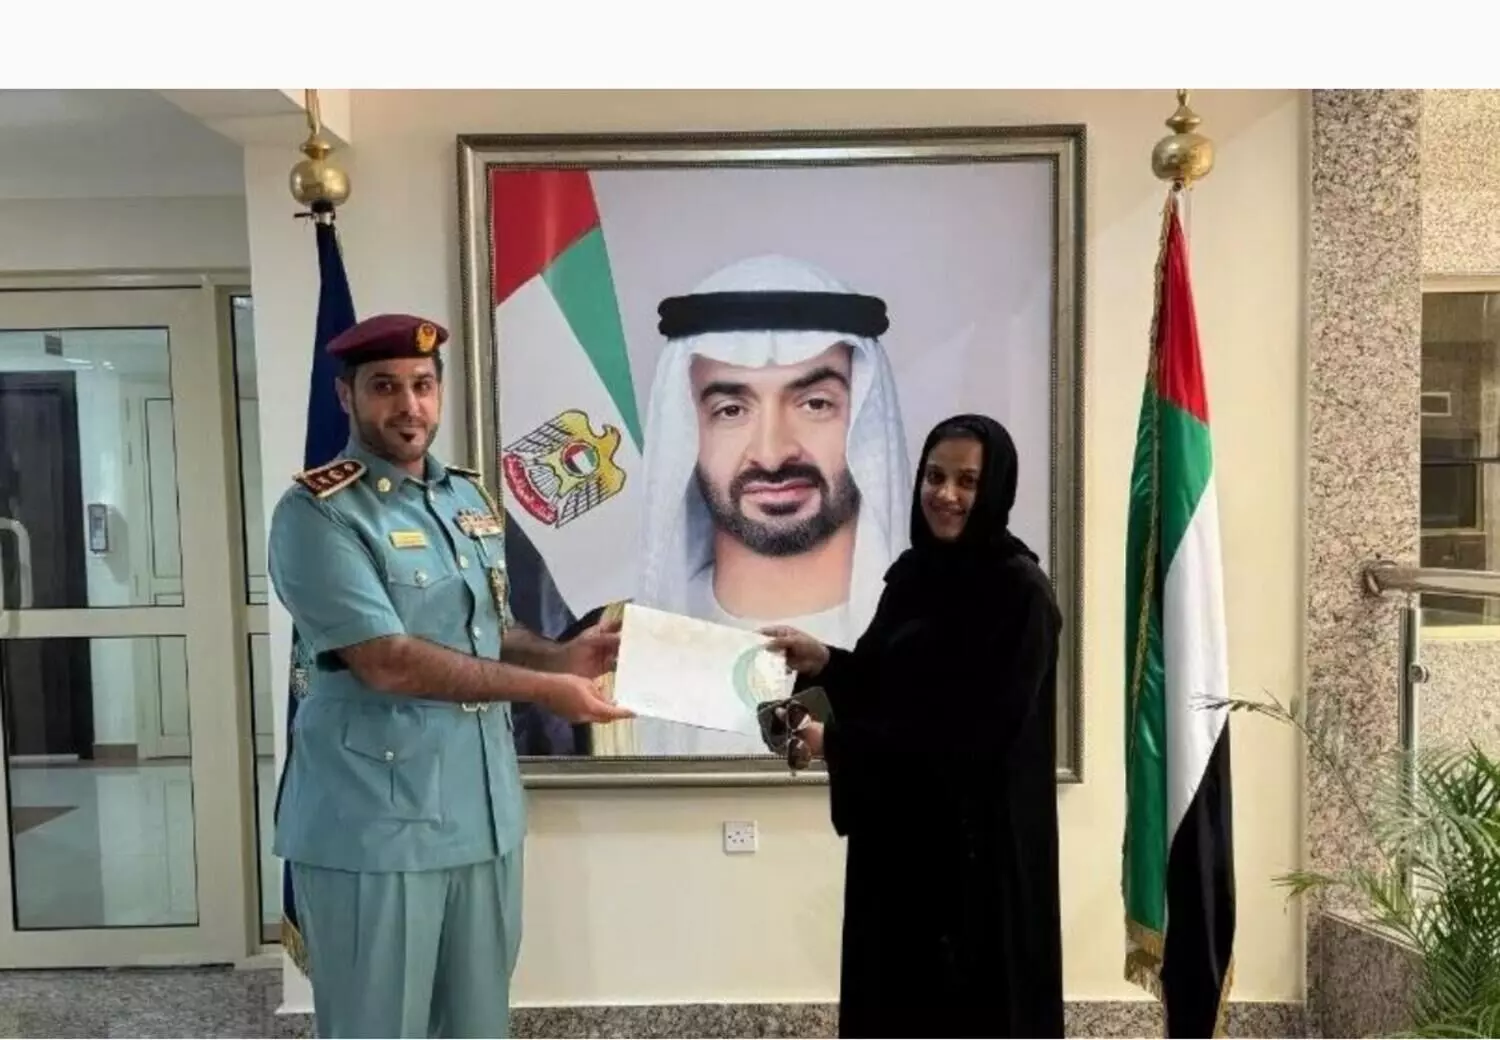 Ajman doctor honoured for heroic rescue at traffic accident site